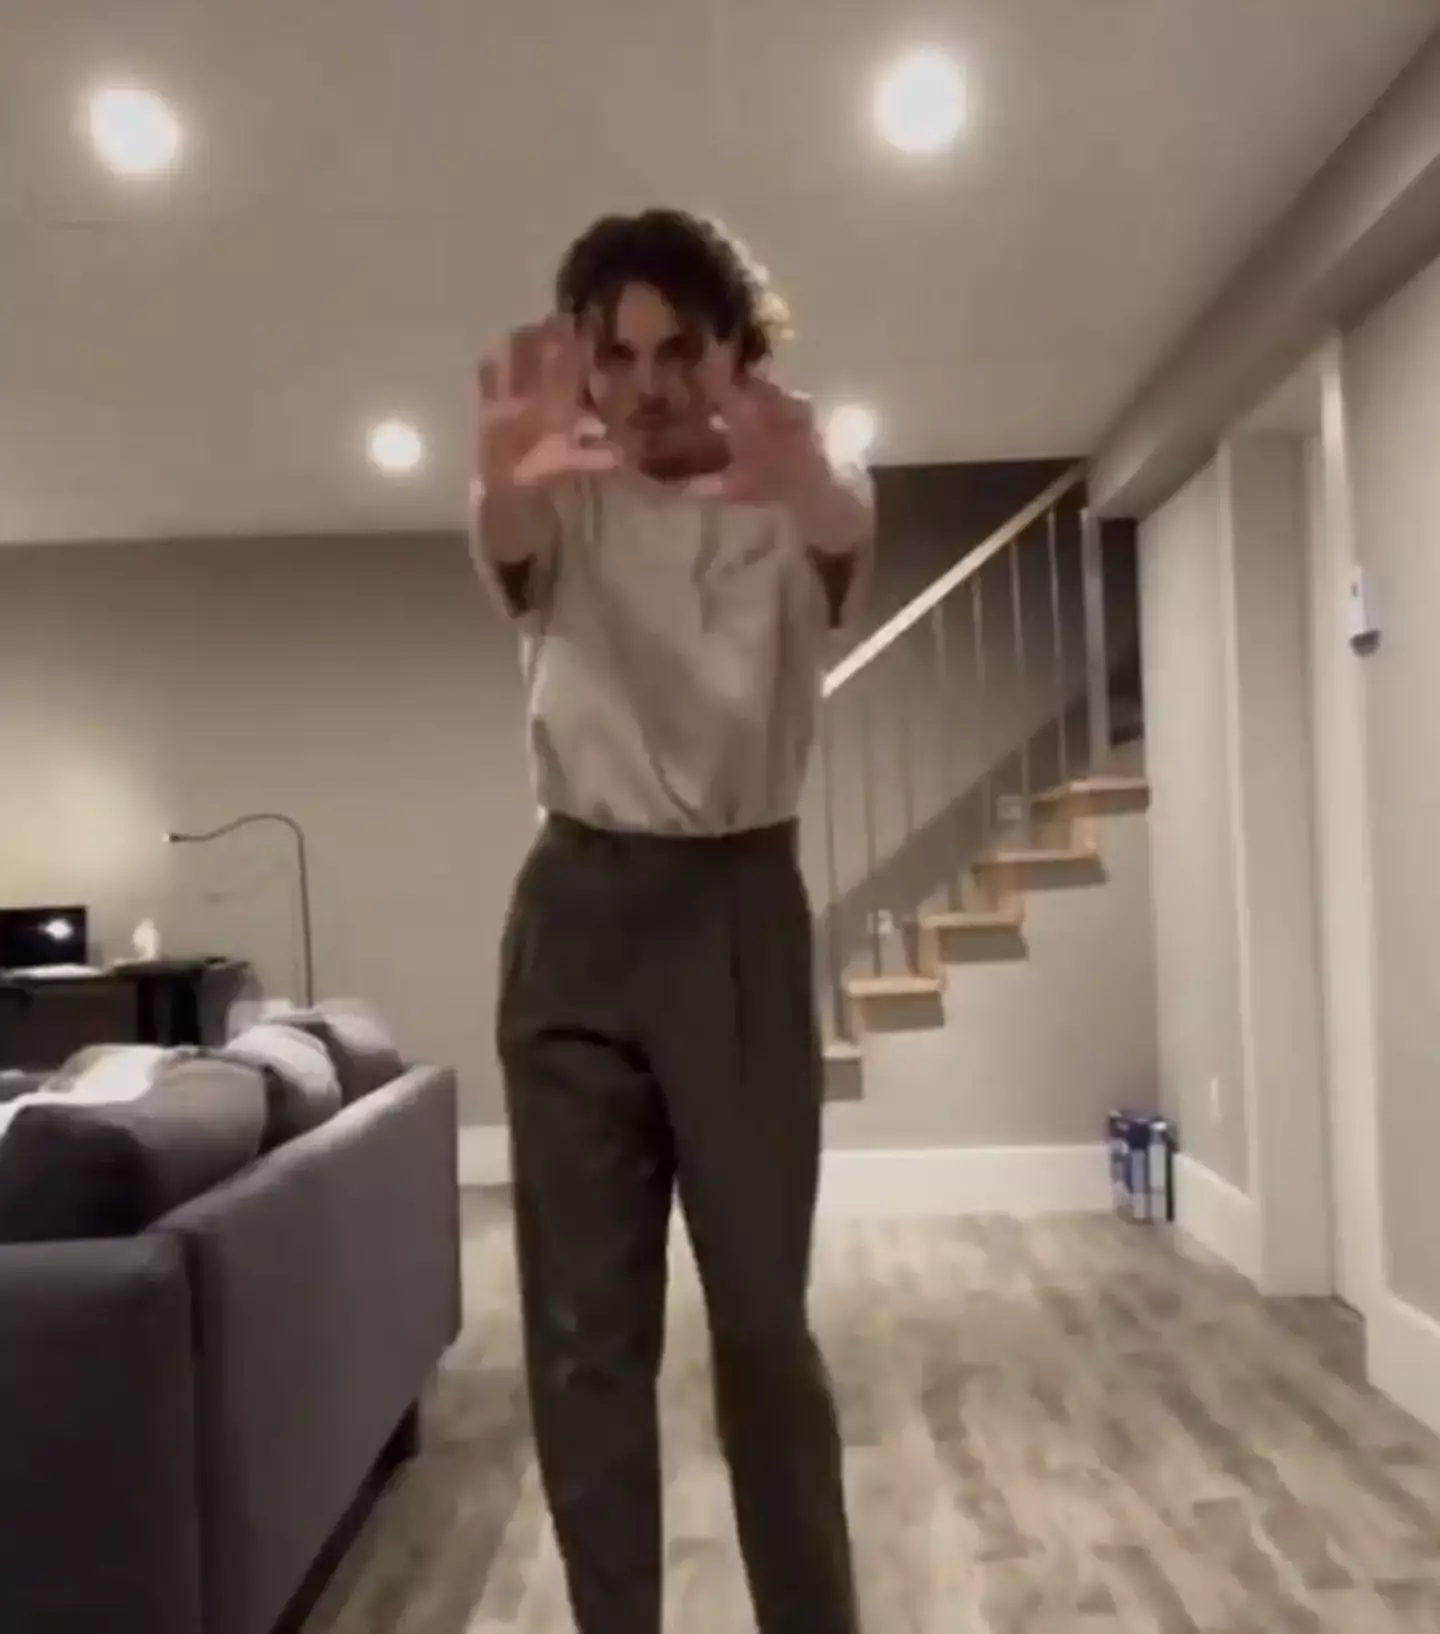 People have spotted a terrifying figure in a video of a TikTok dancer who was home alone.